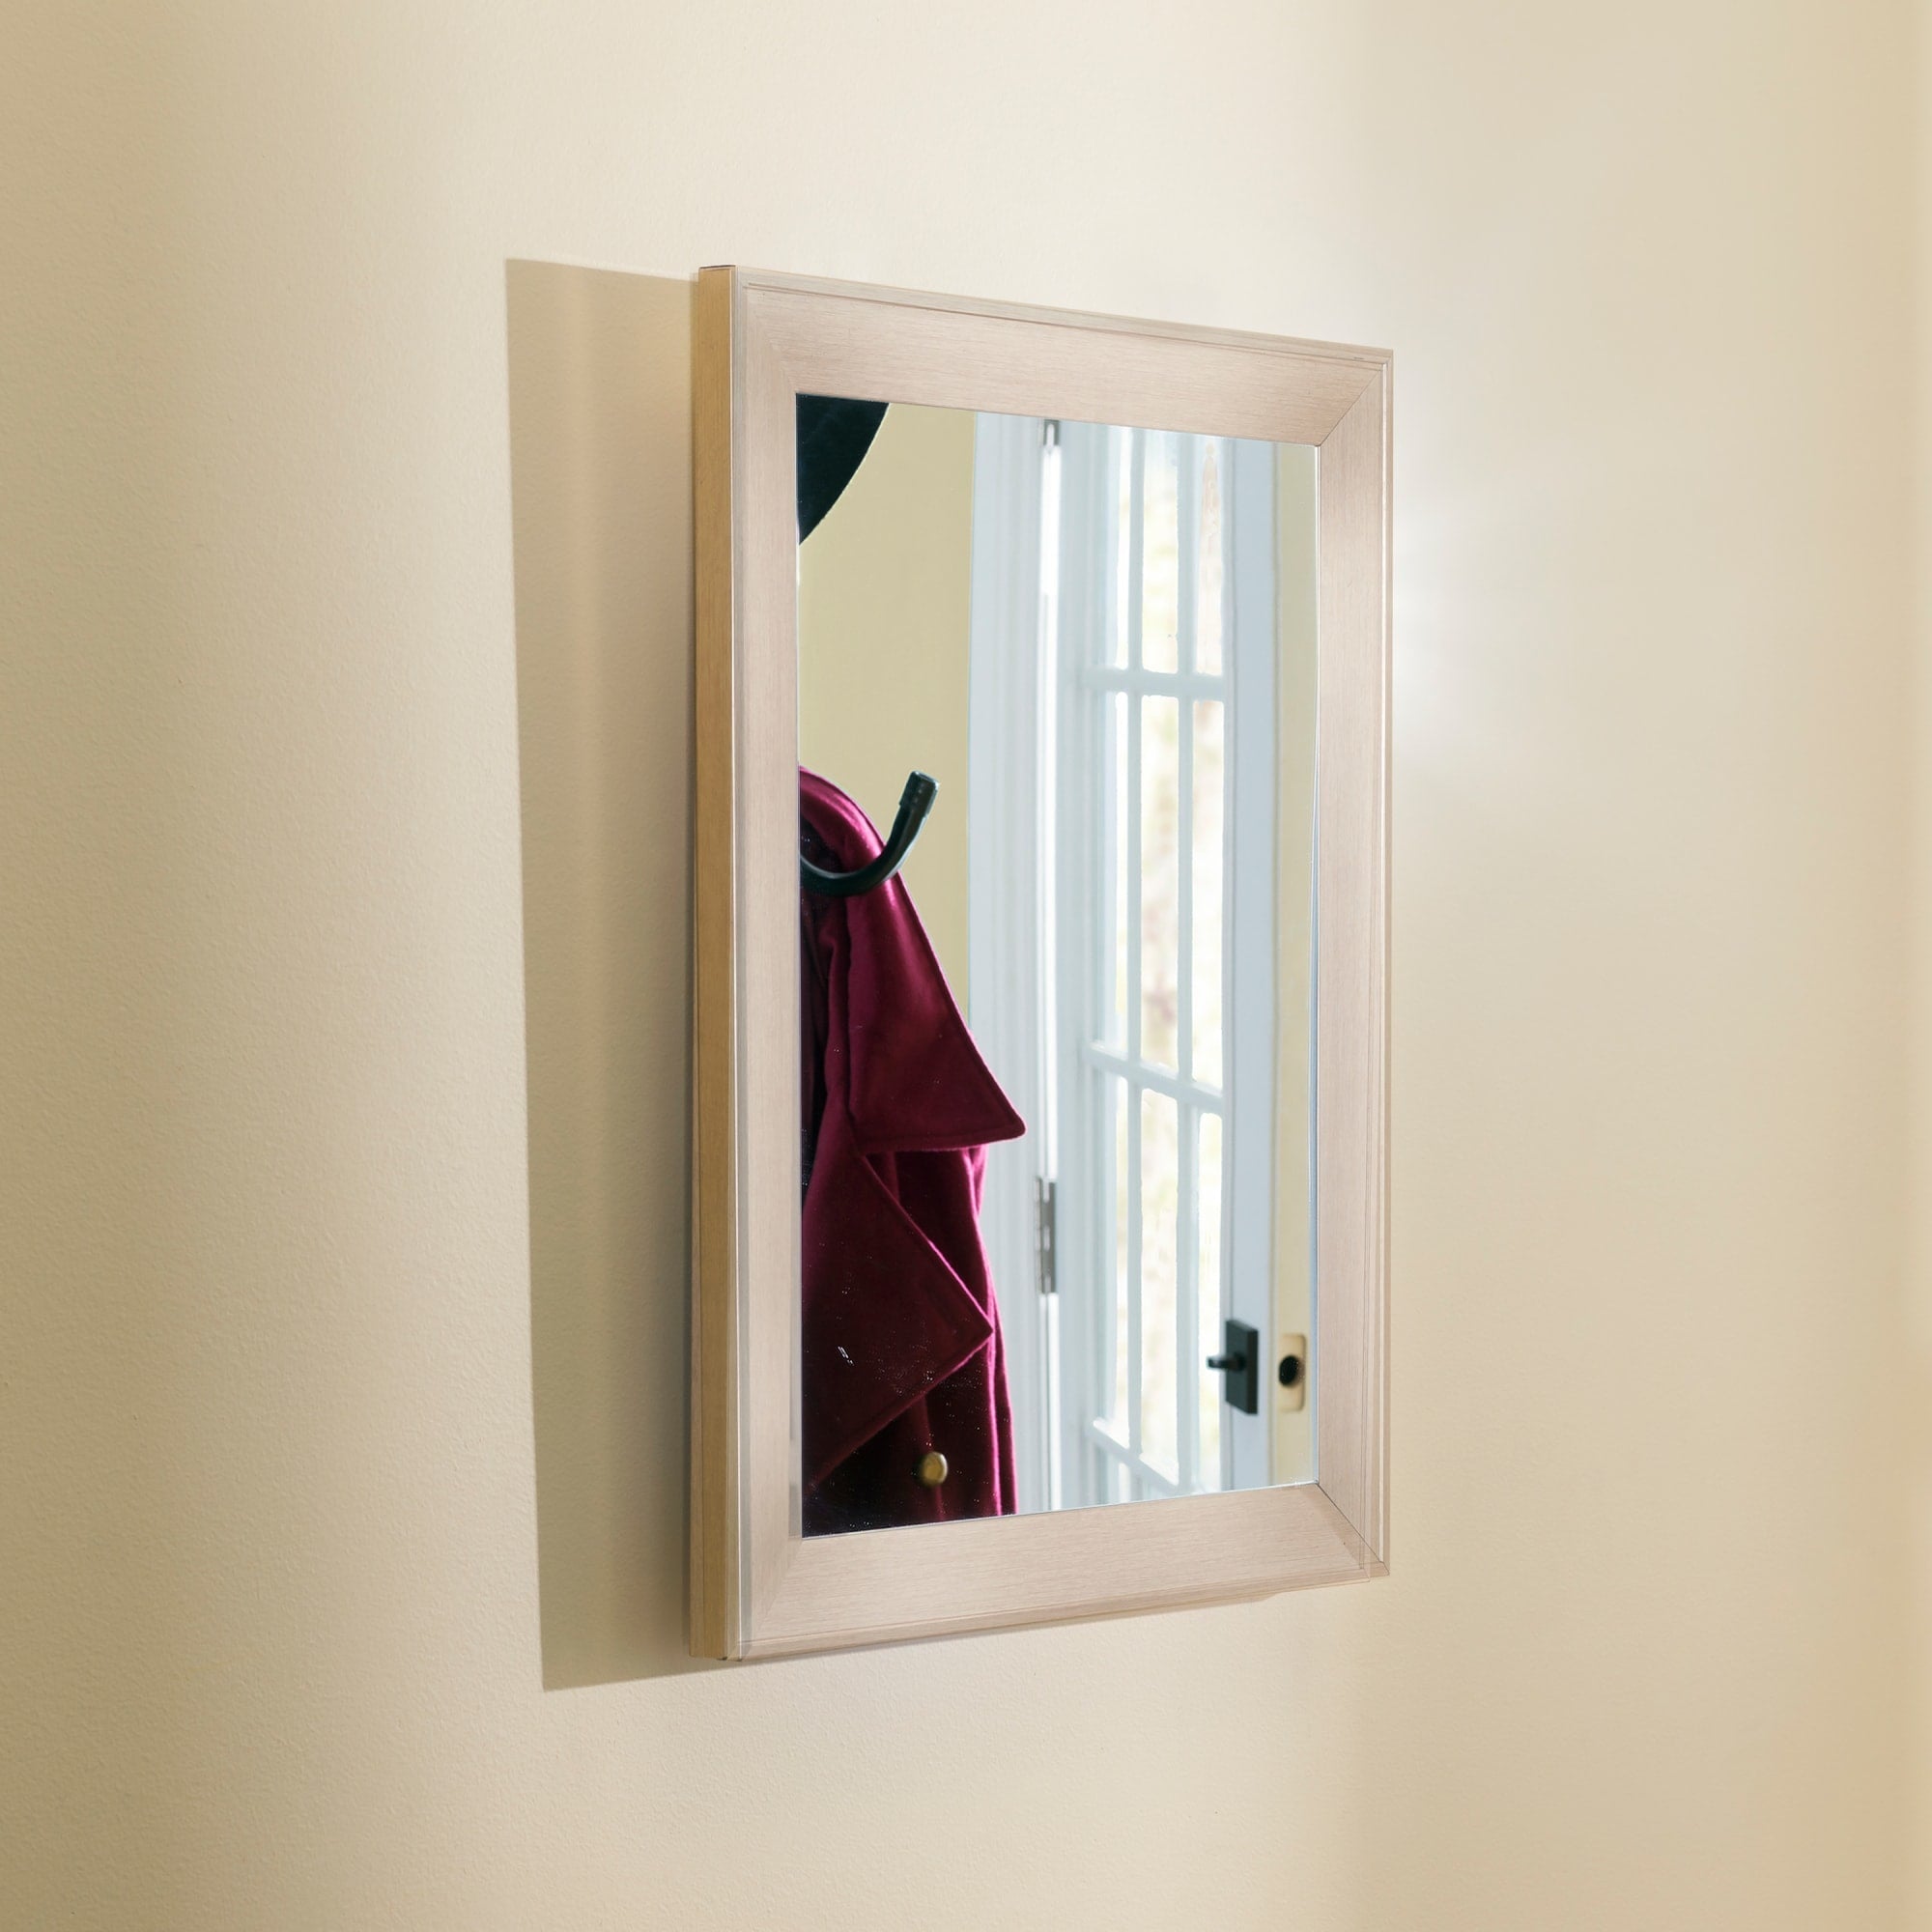 Home Basics Contemporary Rectangle Wall Mirror, Gold $5.00 EACH, CASE PACK OF 6